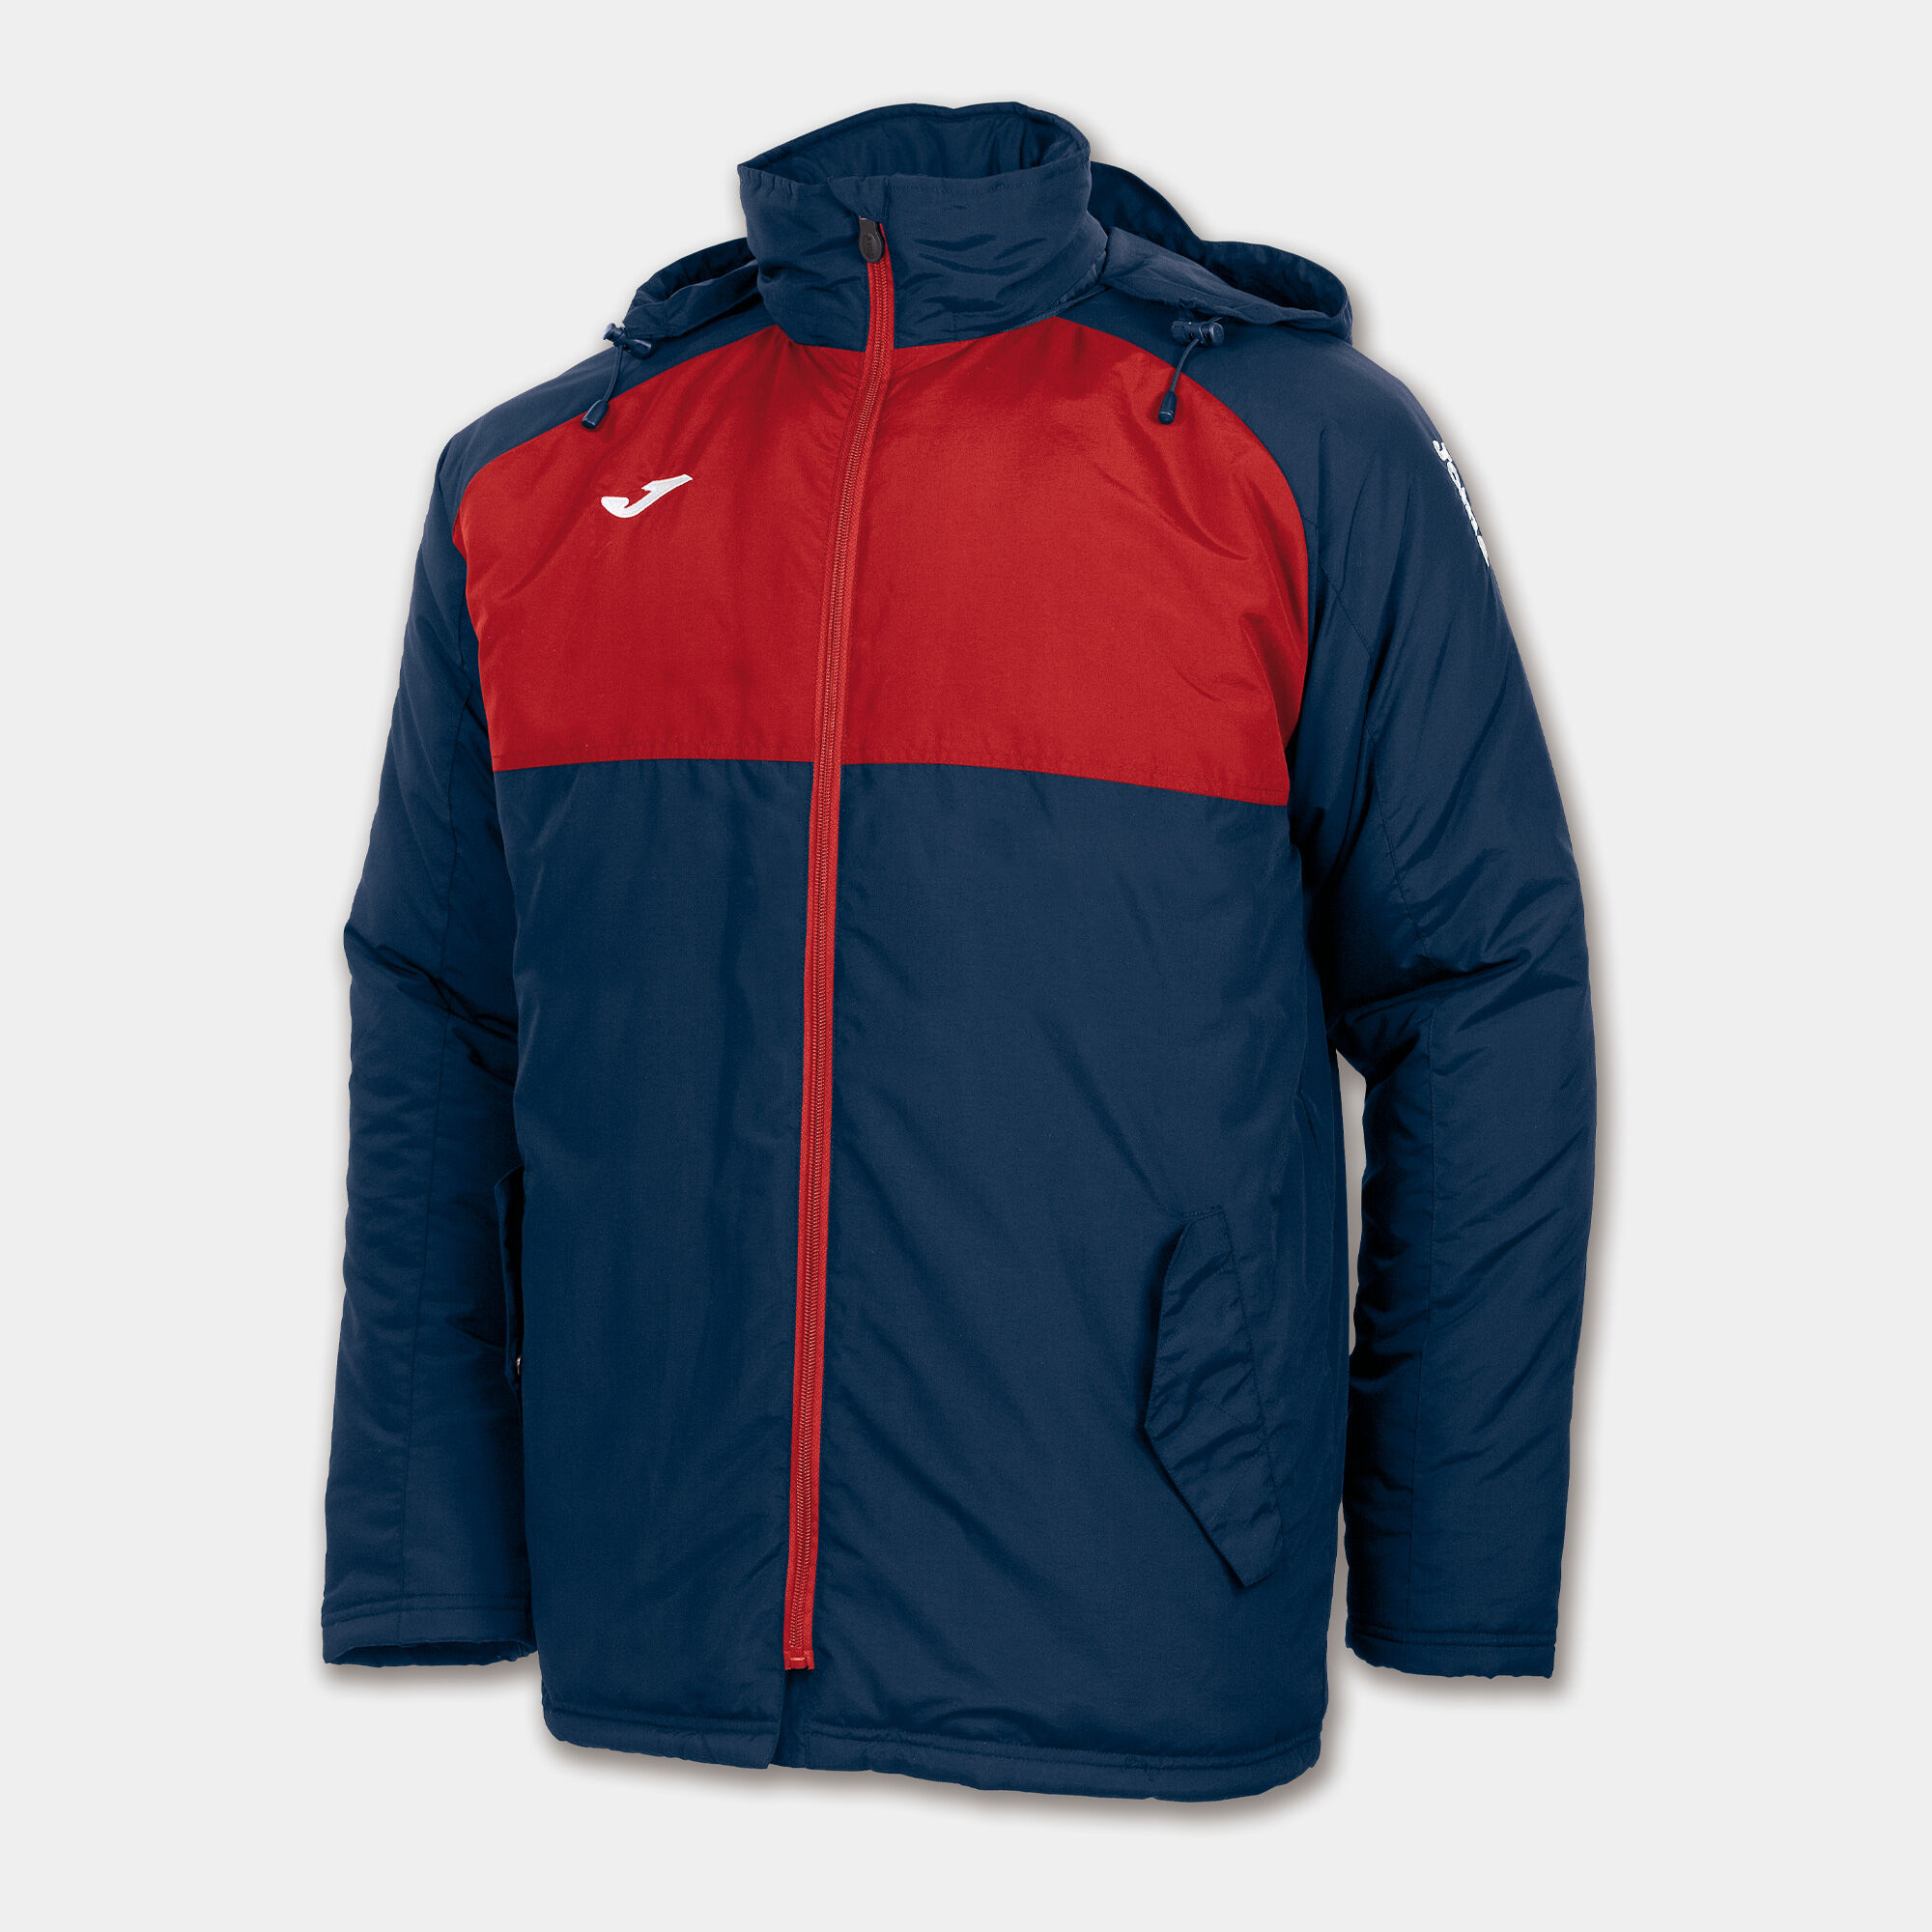 ANORAK MAN ANDES NAVY BLUE RED